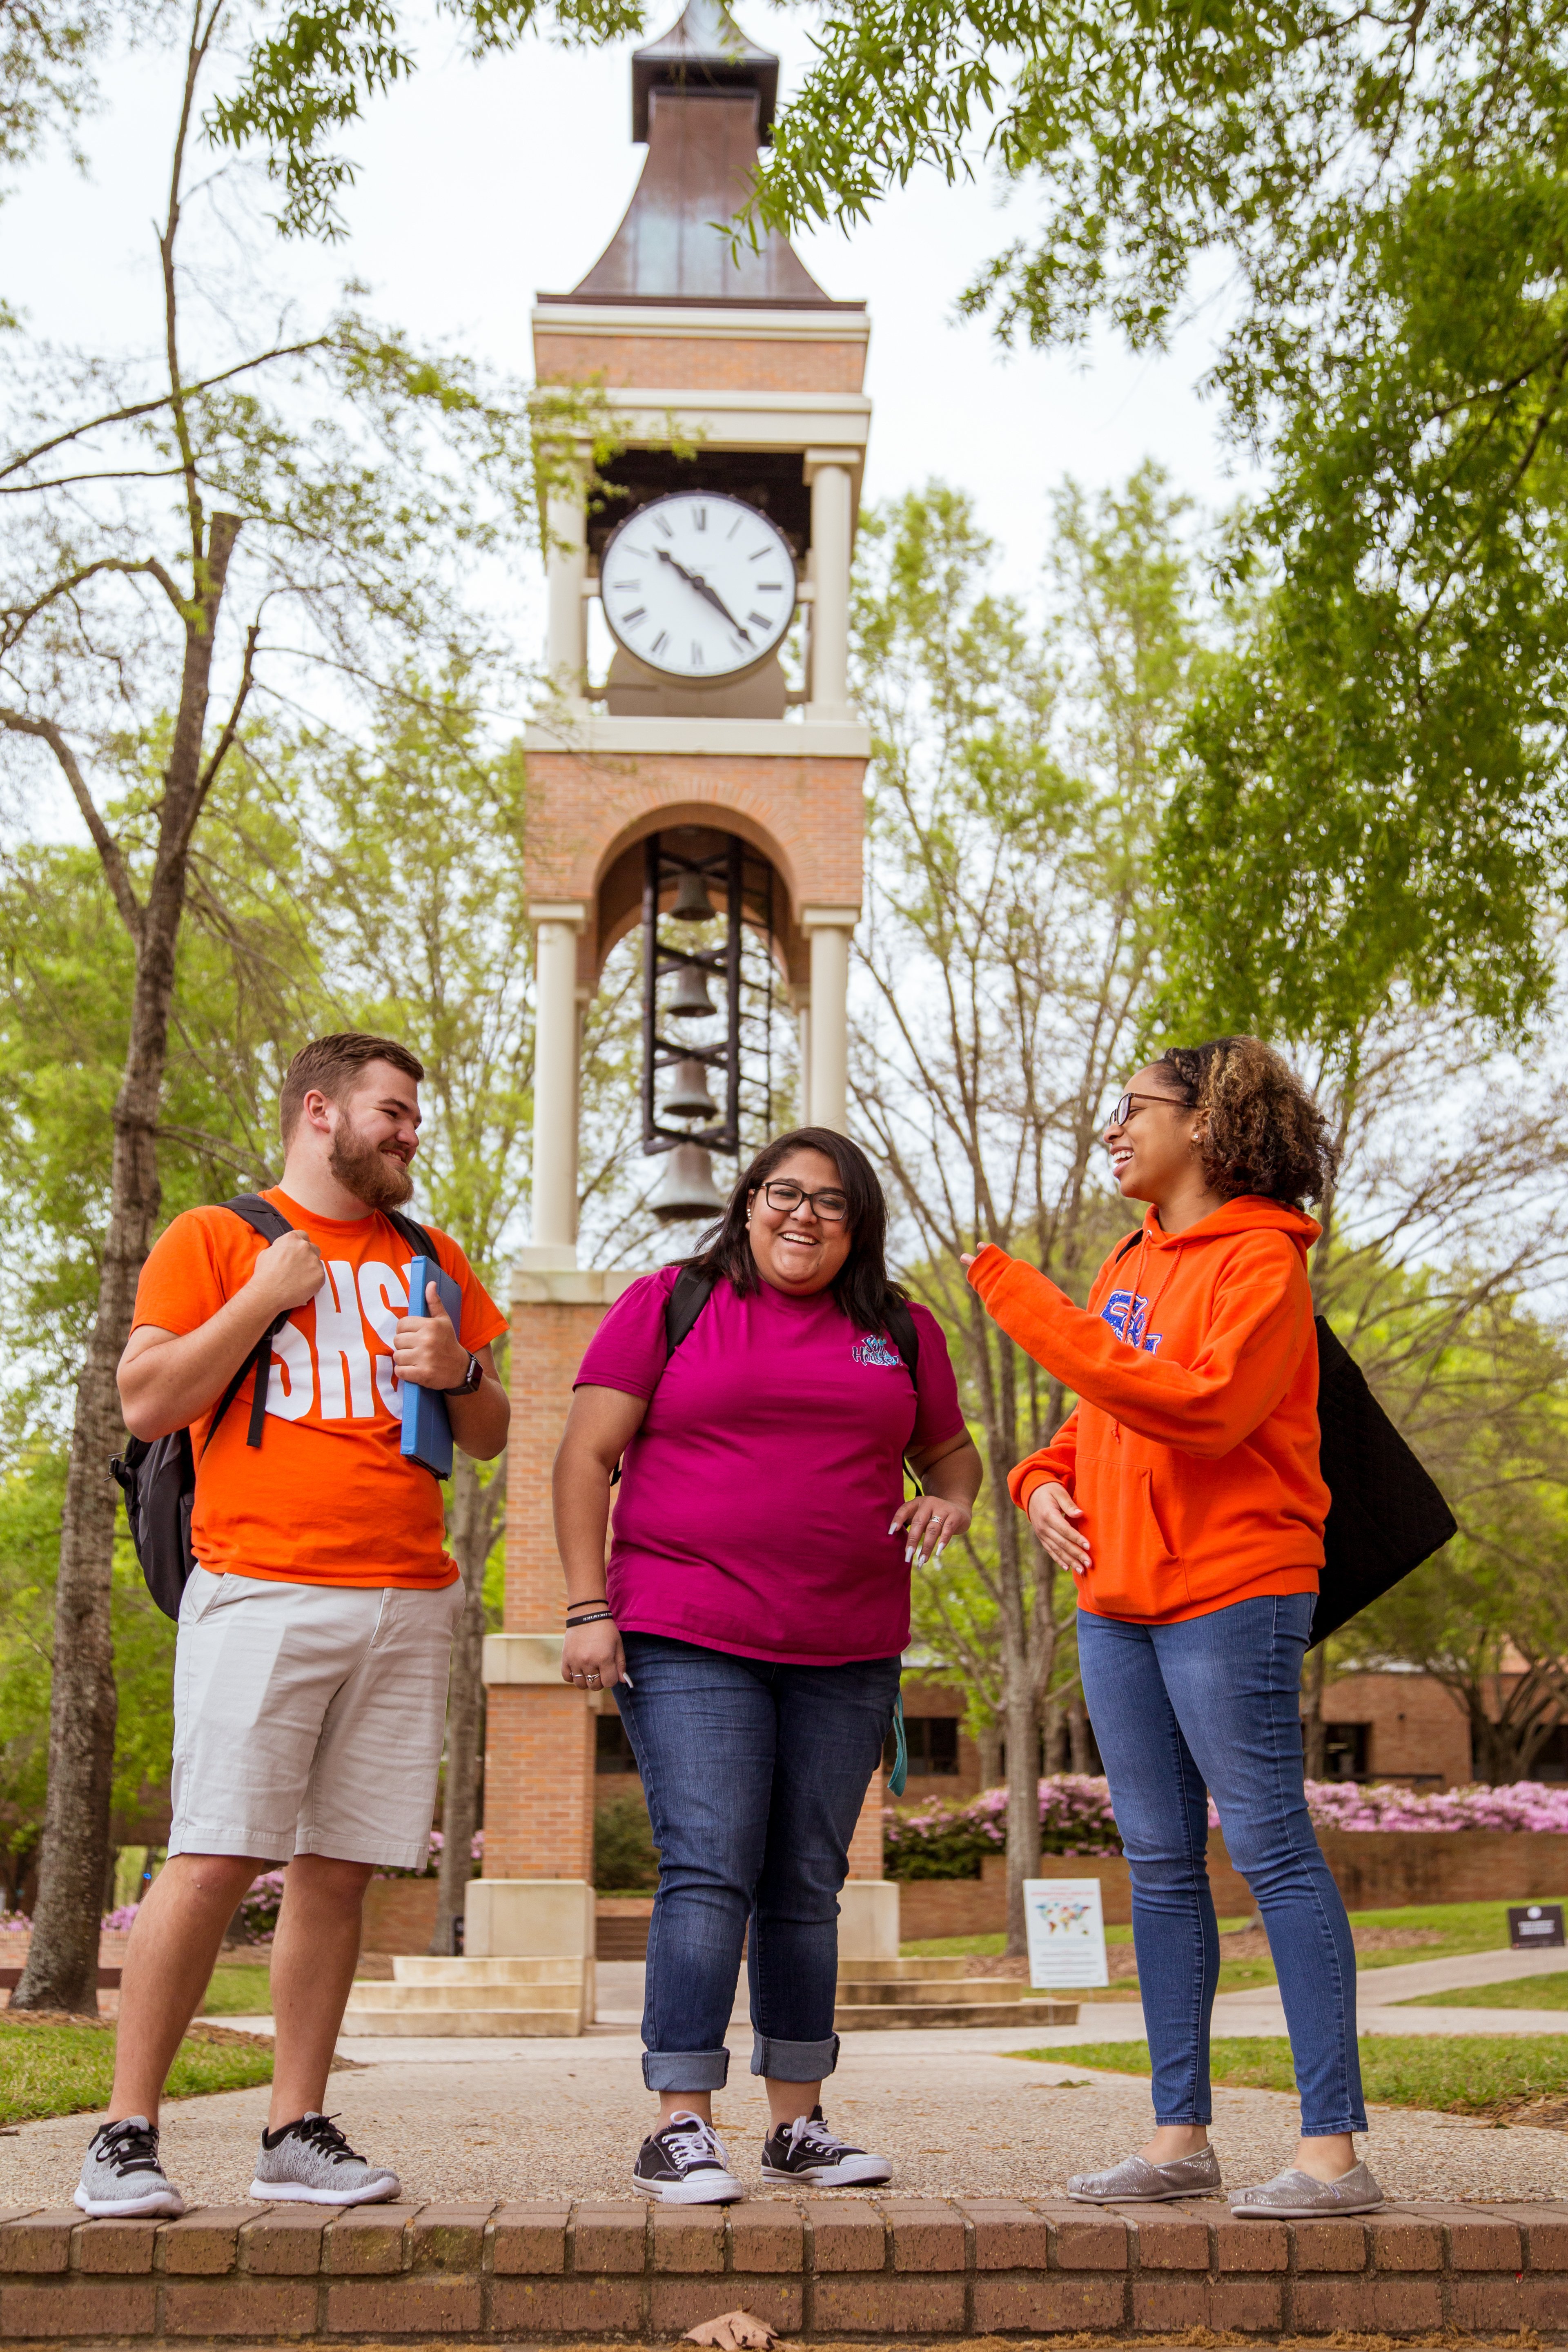 Three students smiling and talking in front of clock tower.